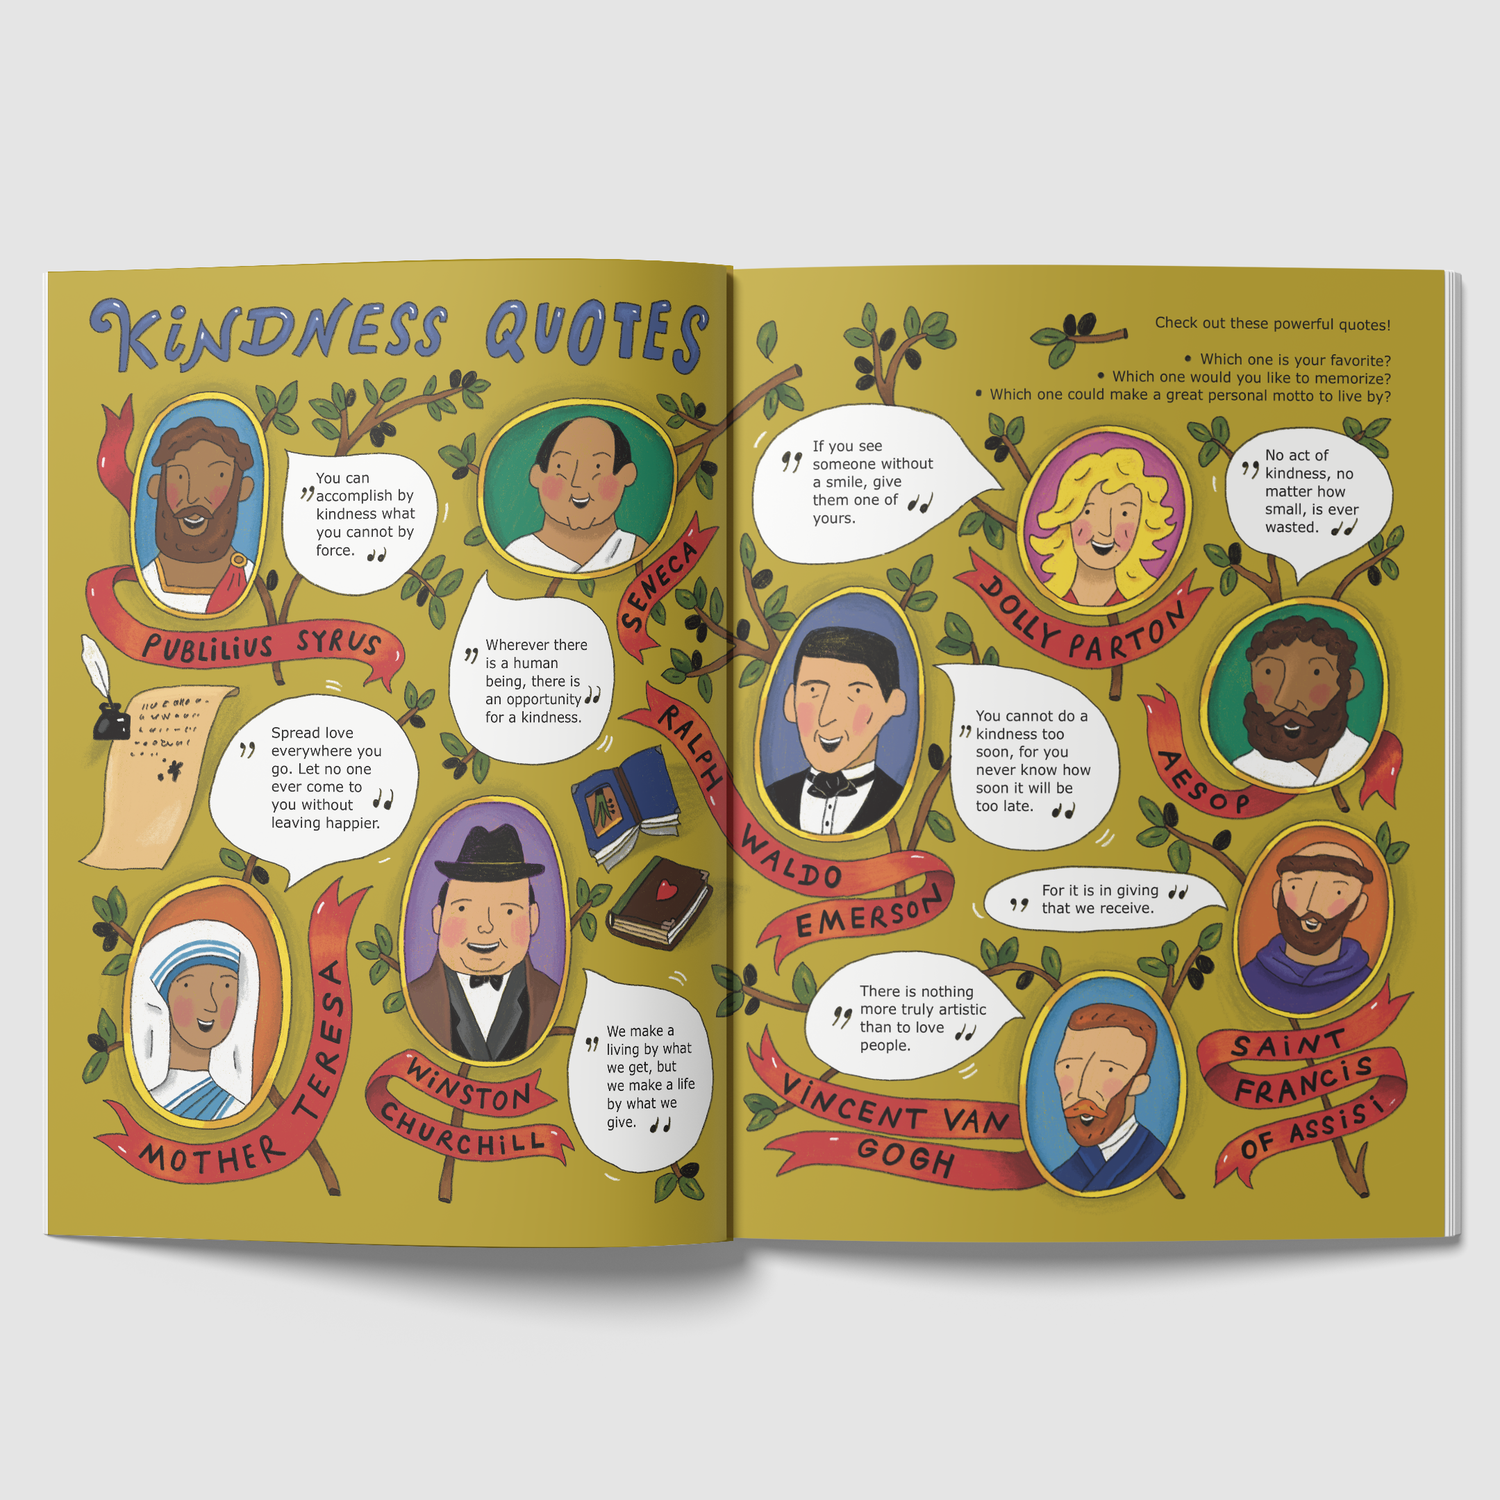 What's for Dinner? The Kindness Magazine